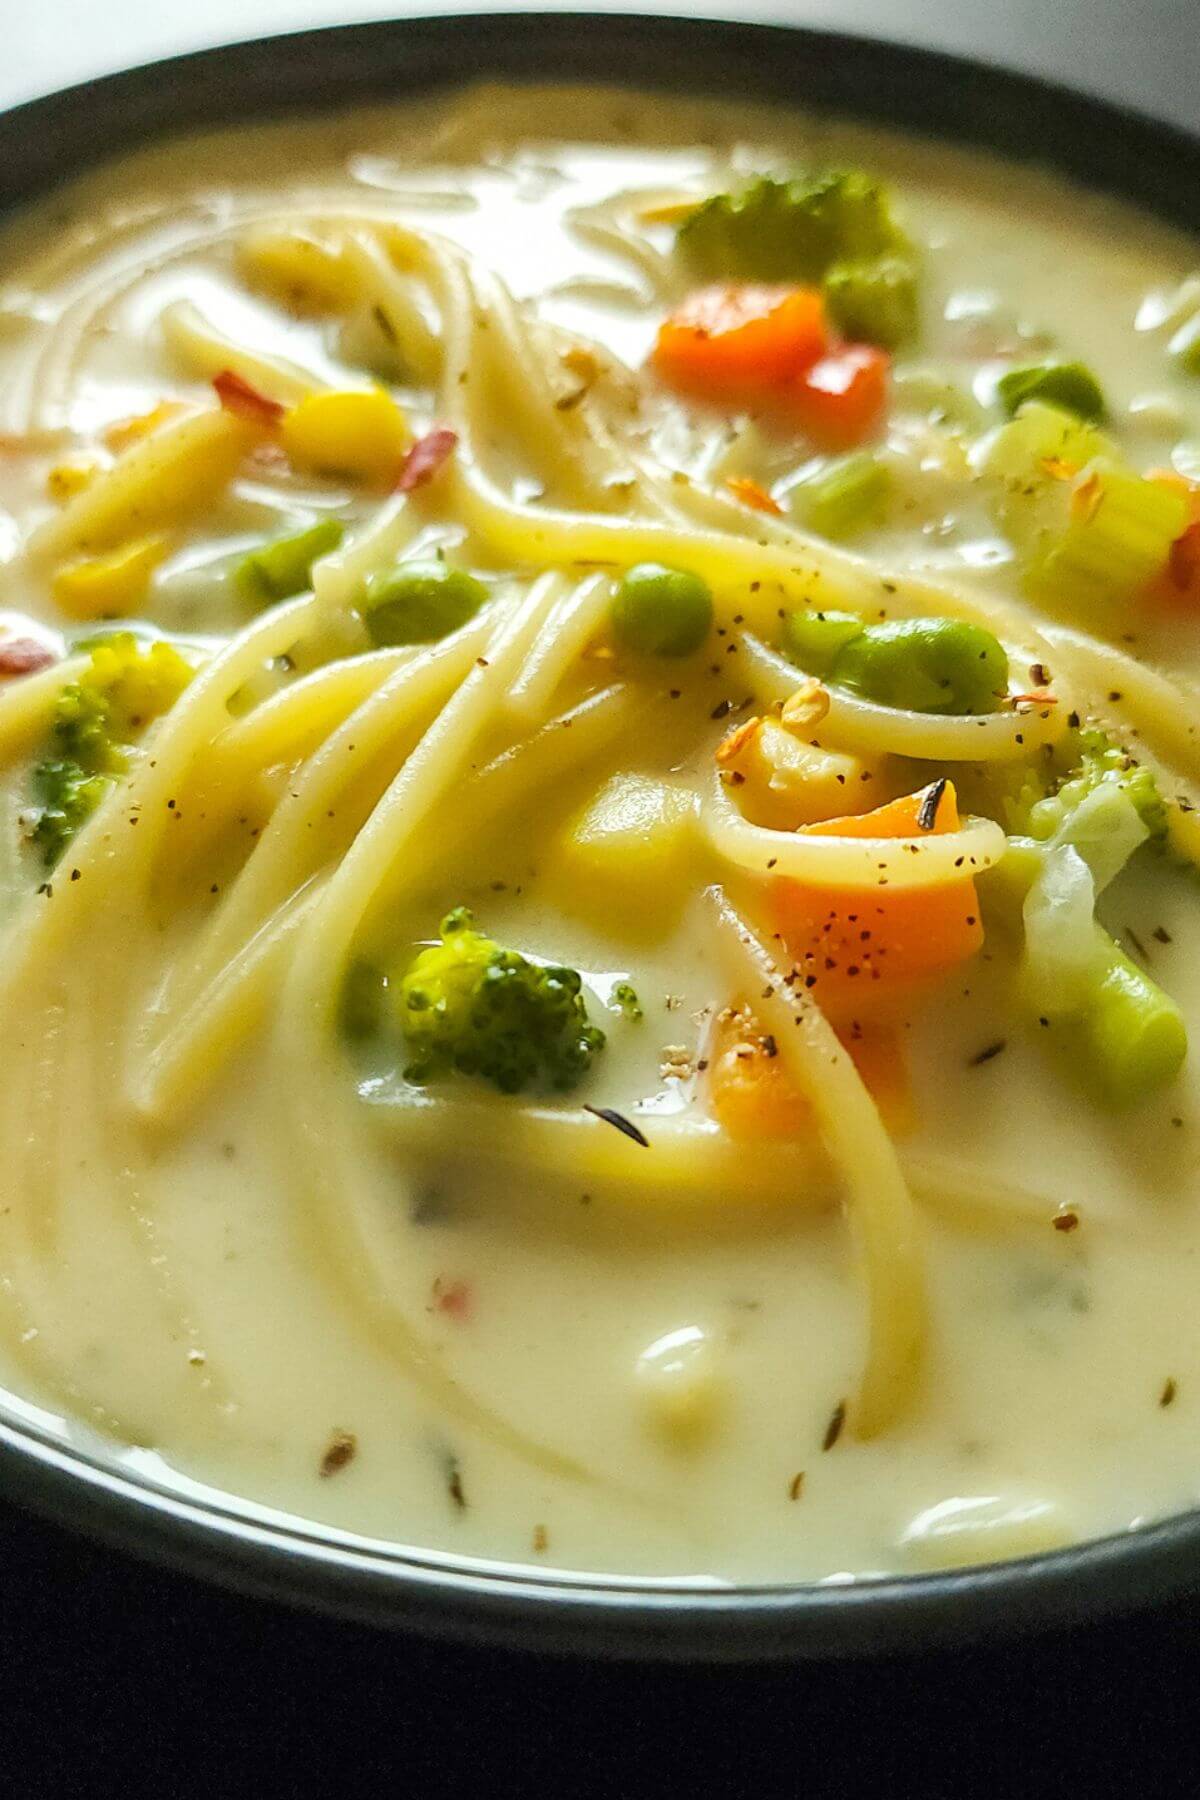 Cream of vegetable soup with noodles in a black bowl.